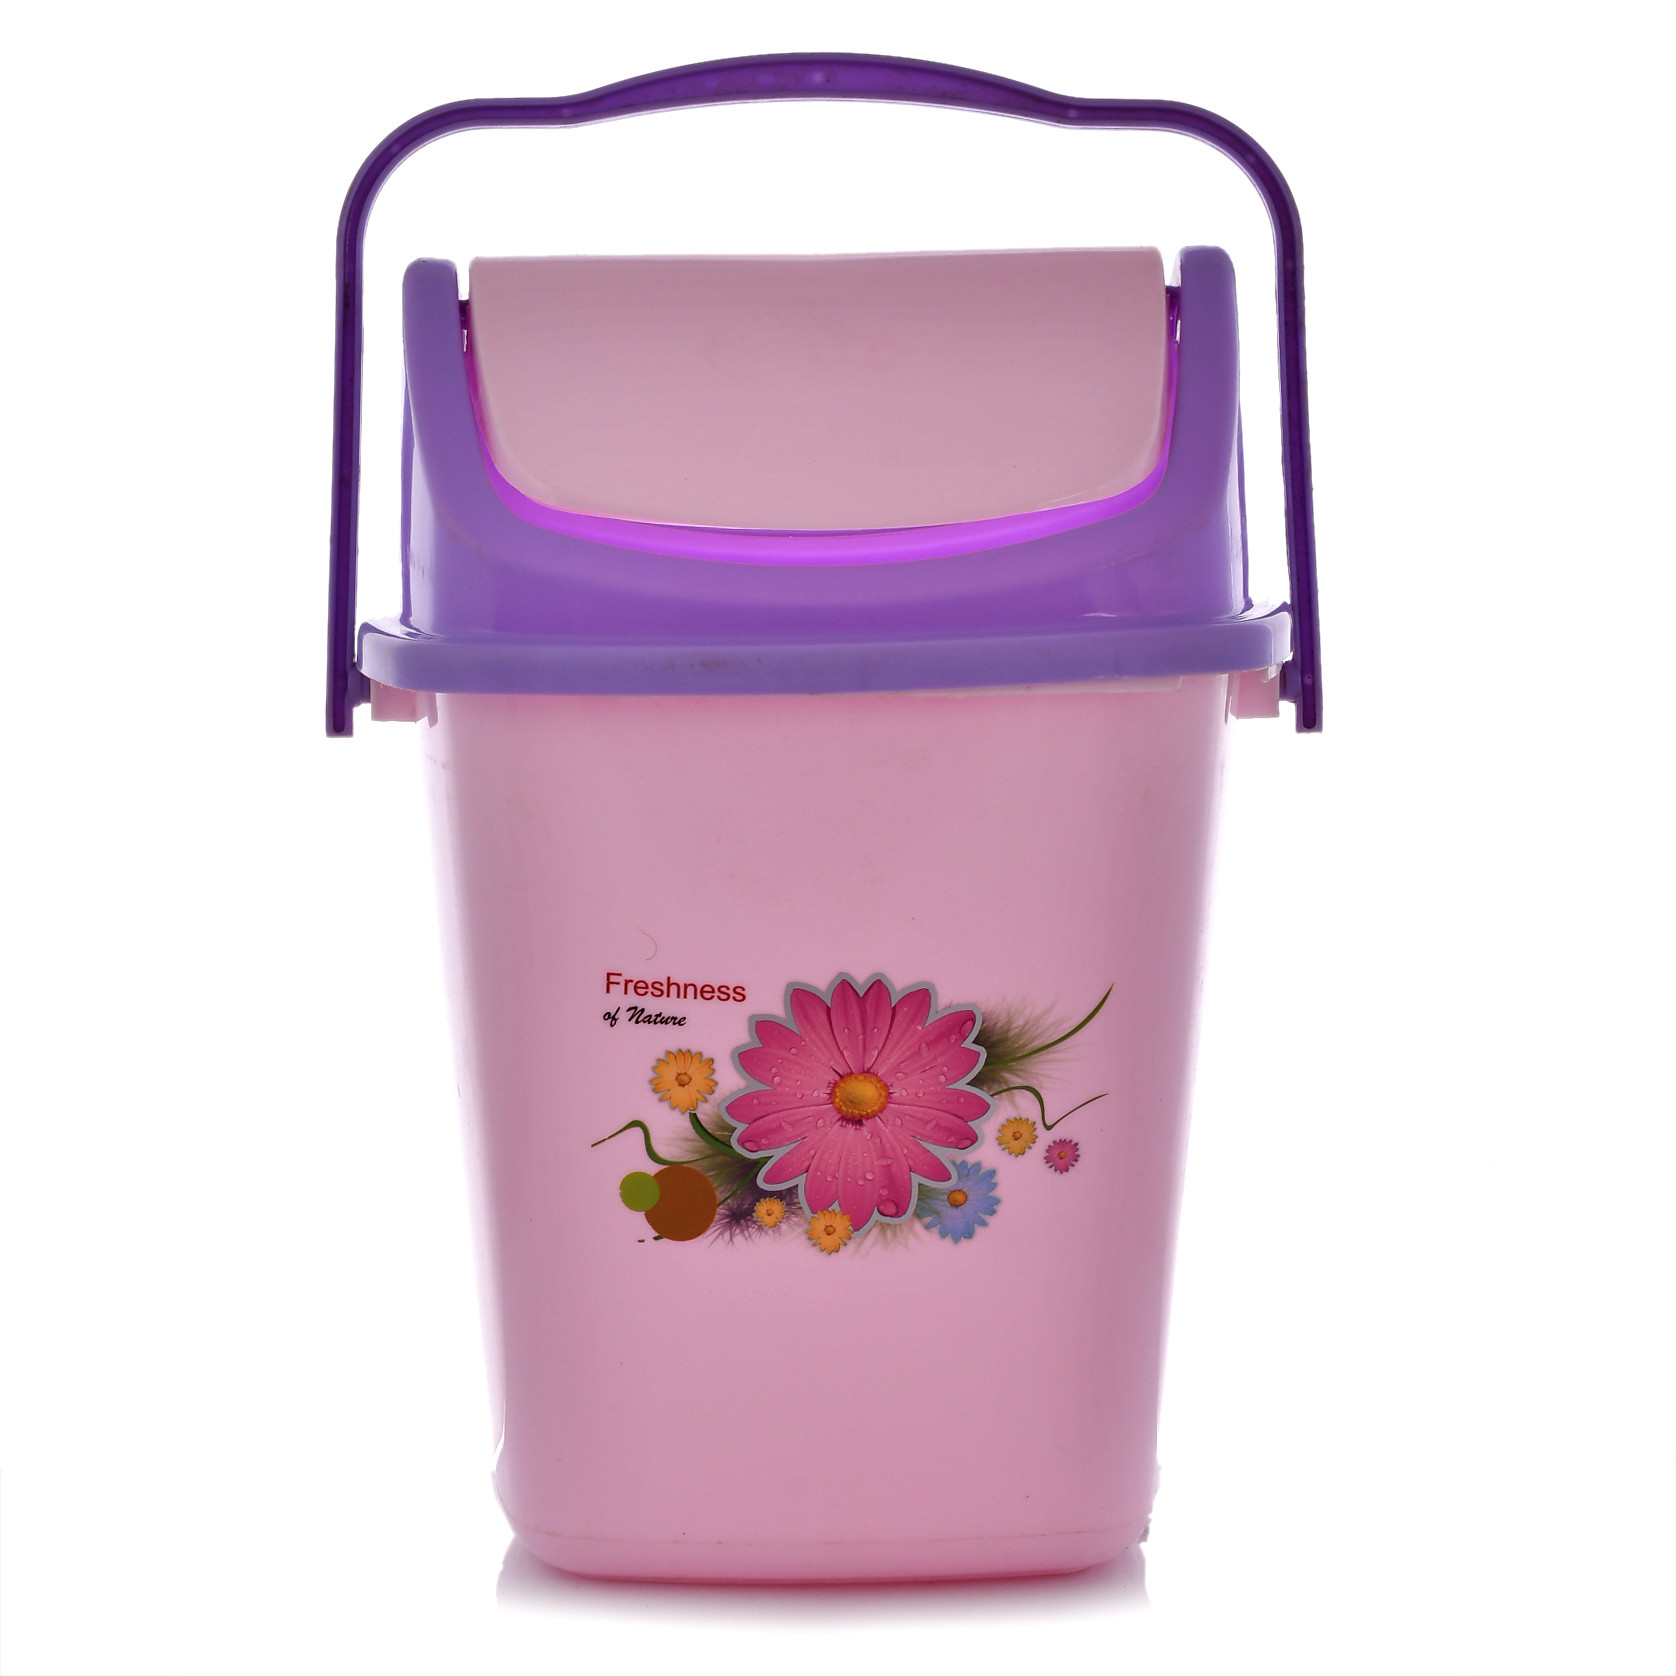 Kuber Industries 2 Pieces Pluto Plastic Swing Printed Garbage Waste Dustbin for Home, Office with Handle, 5 Liters (Cream & Purple)-KUBMART3106